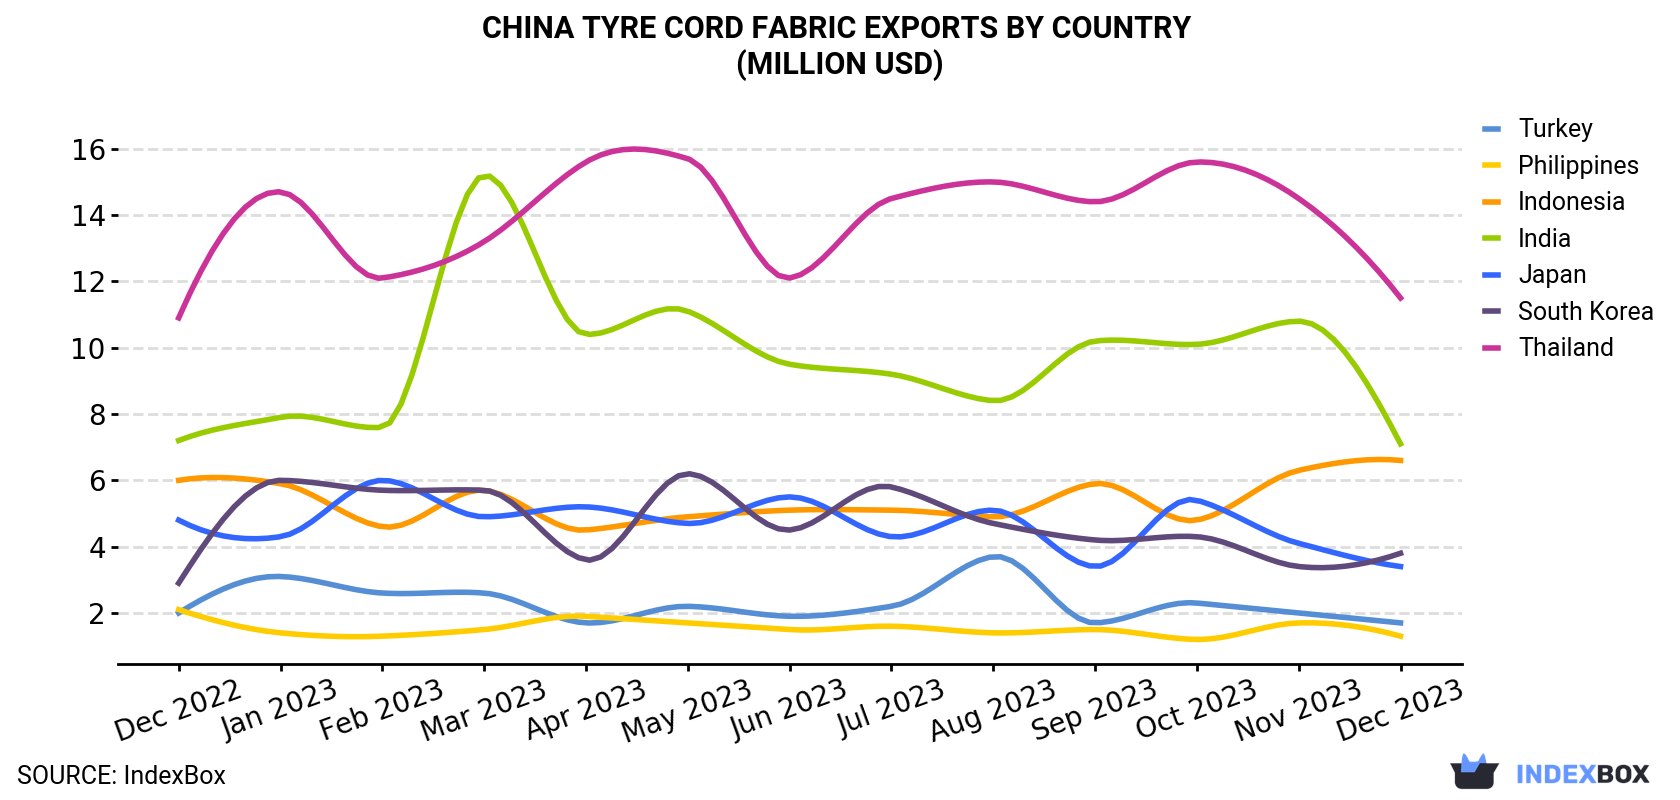 China Tyre Cord Fabric Exports By Country (Million USD)